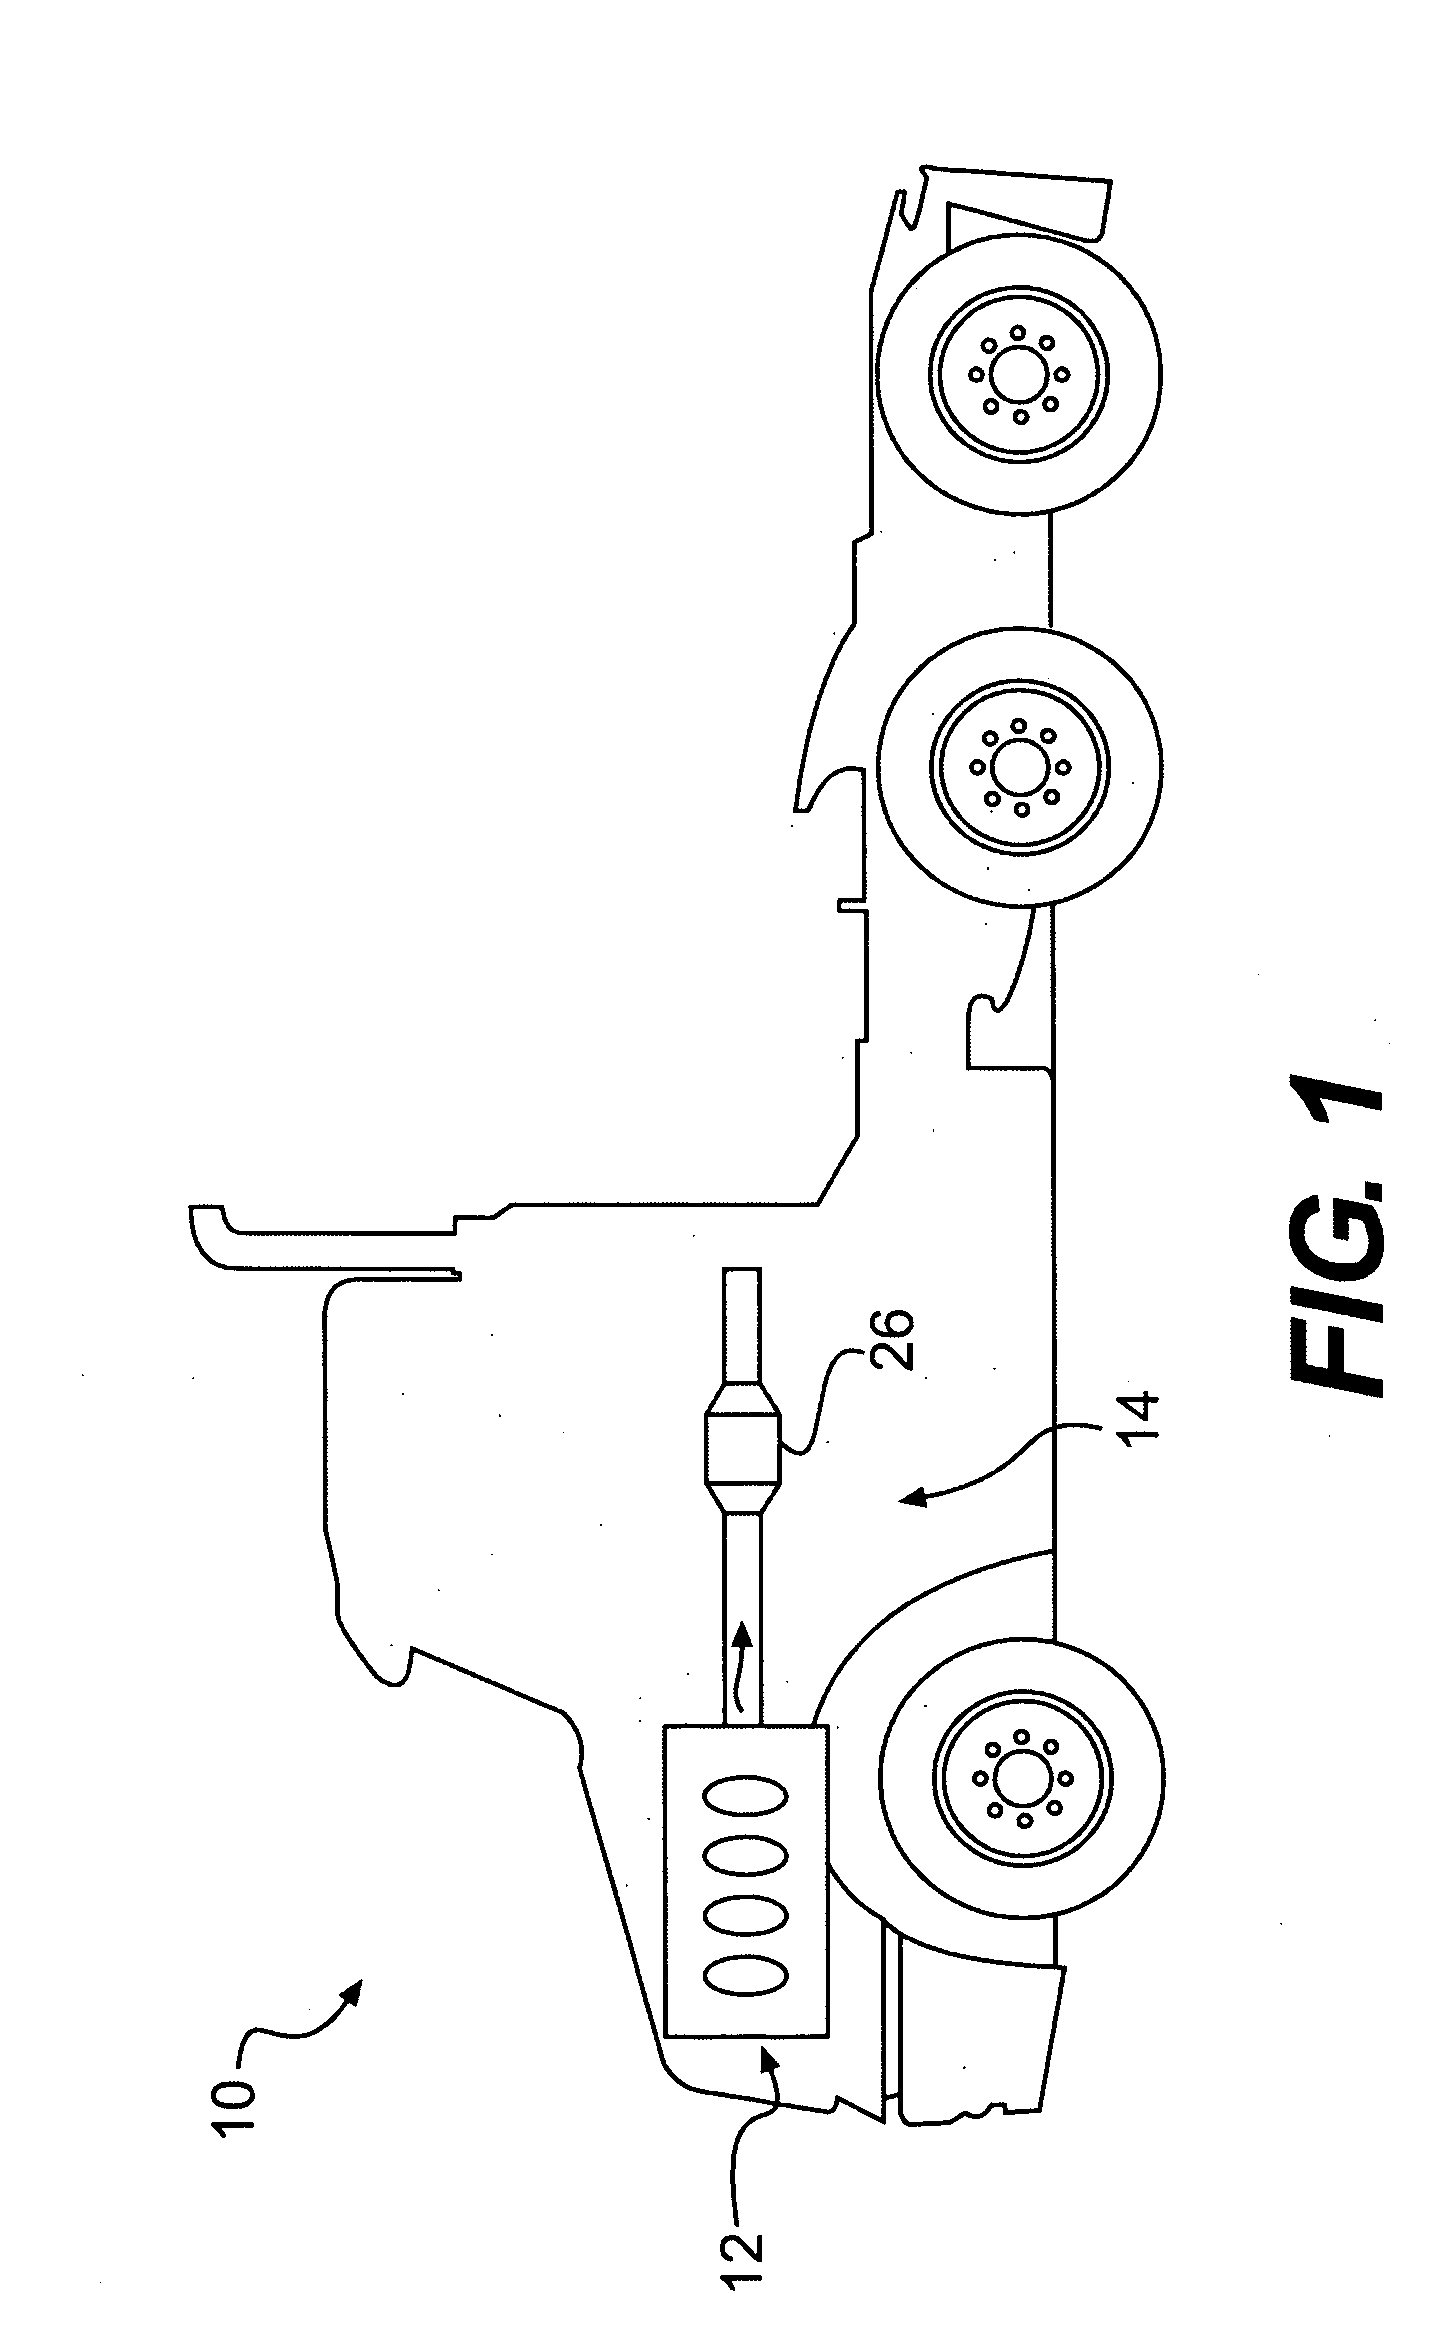 Balanced partial two-stroke engine